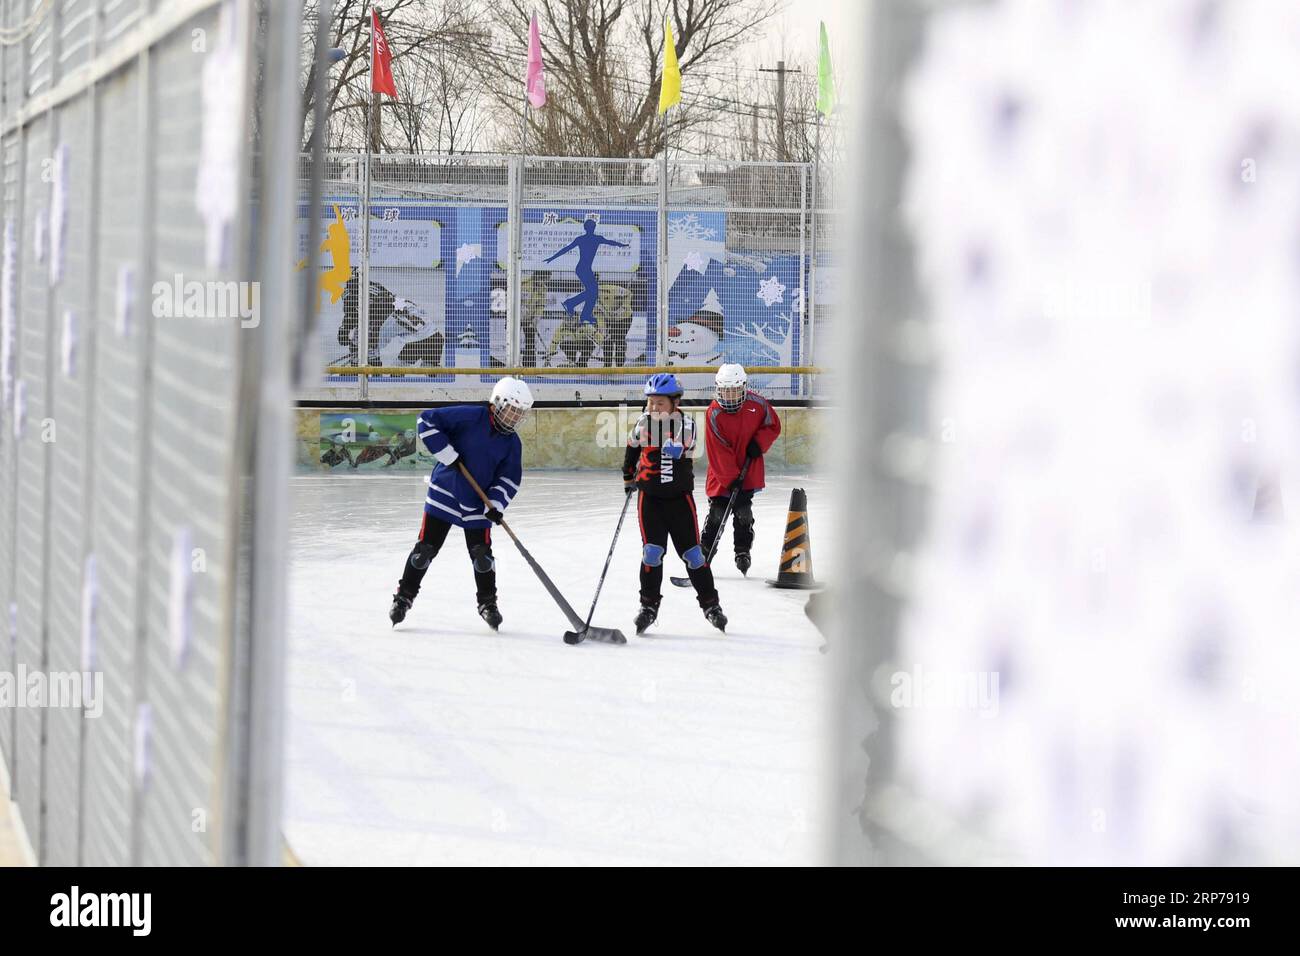 (190201) -- BEIJING, Feb. 1, 2019 (Xinhua) -- Photo taken on Jan. 9, 2019 shows students practicing ice hockey during a training session at Taipingzhuang Central Primary School, in Yanqing District of Beijing, capital of China. Taipingzhuang Central Primary School situated right at the foot of Xiaohaituo Mountains, where the venues for Beijing 2022 Winter Olympic games are under construction. Teachers of Taipingzhuang Central Primary School have turned an experimental farmland into a seasonal skating rink for the pupils here to learn skating since 2016. The school hired a experienced coach, Li Stock Photo